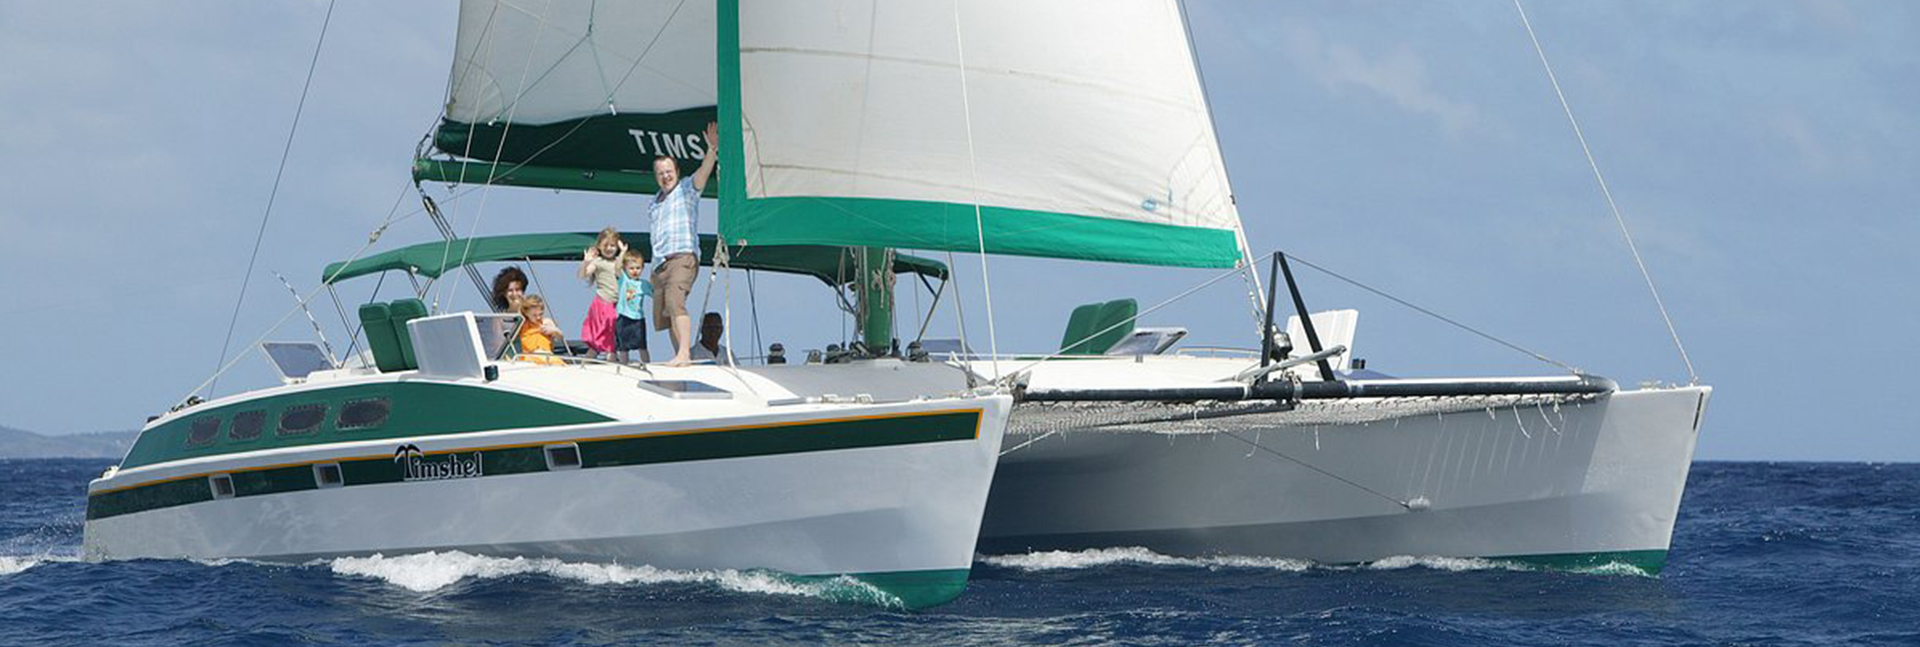 footloose yacht charters